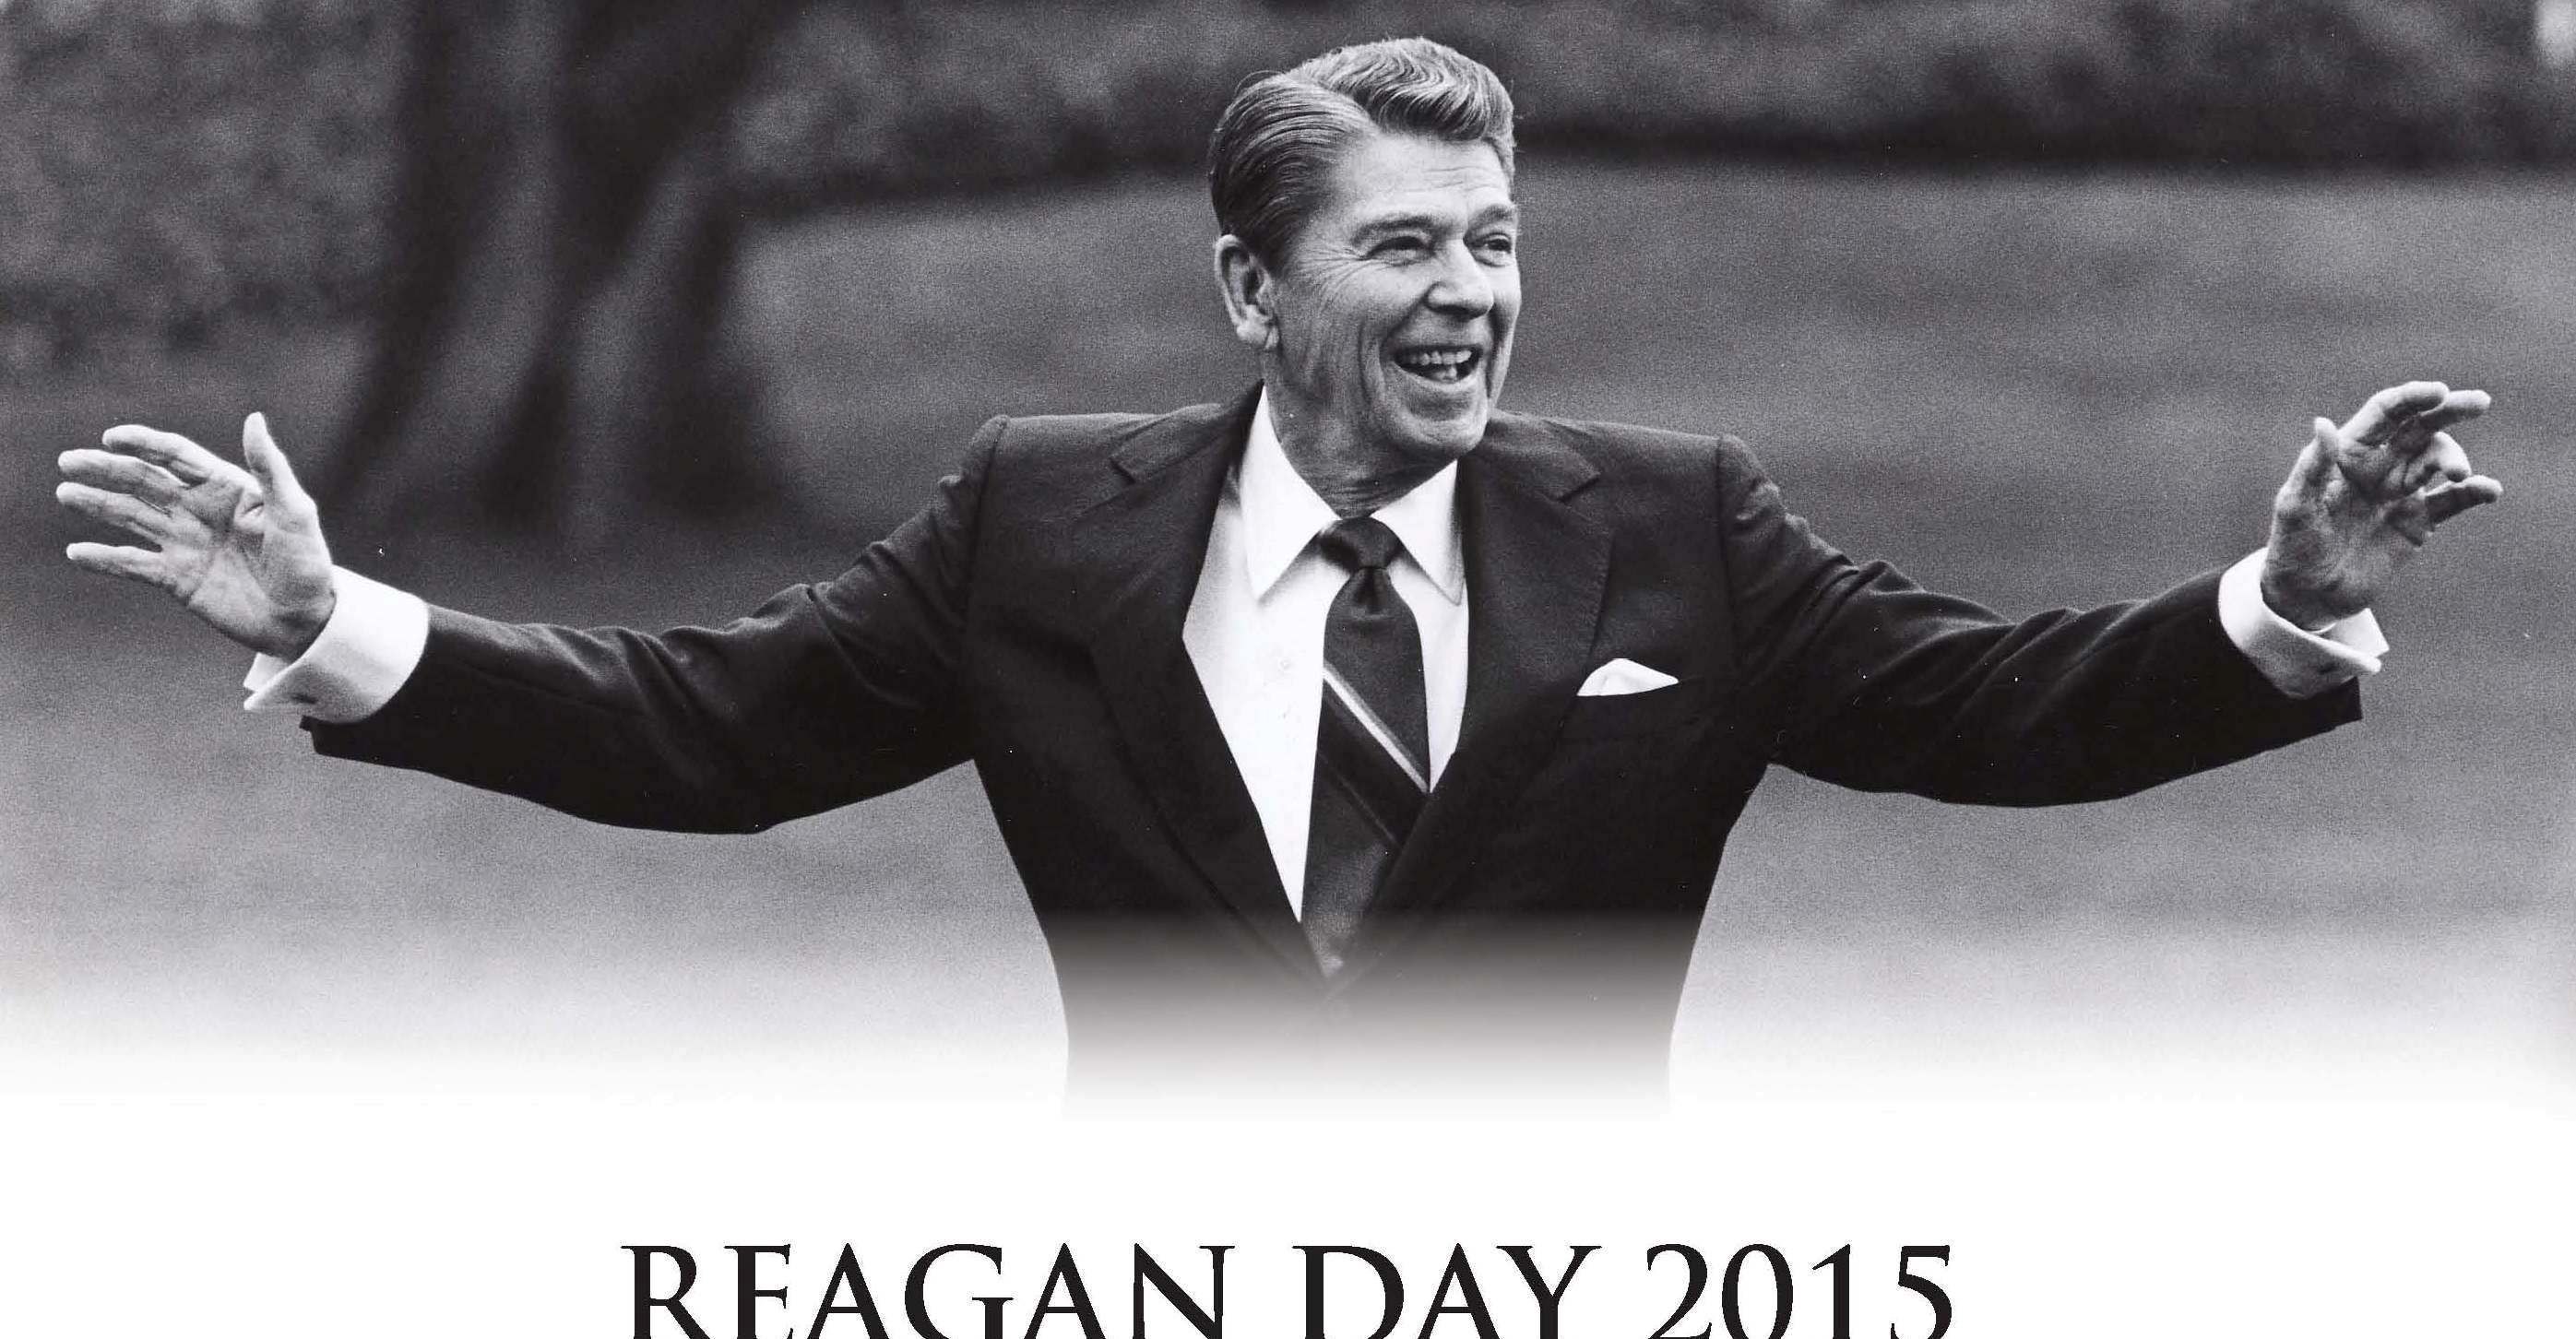 Tickets on sale for Reagan Day 2015, sponsored by Rockwall County GOP